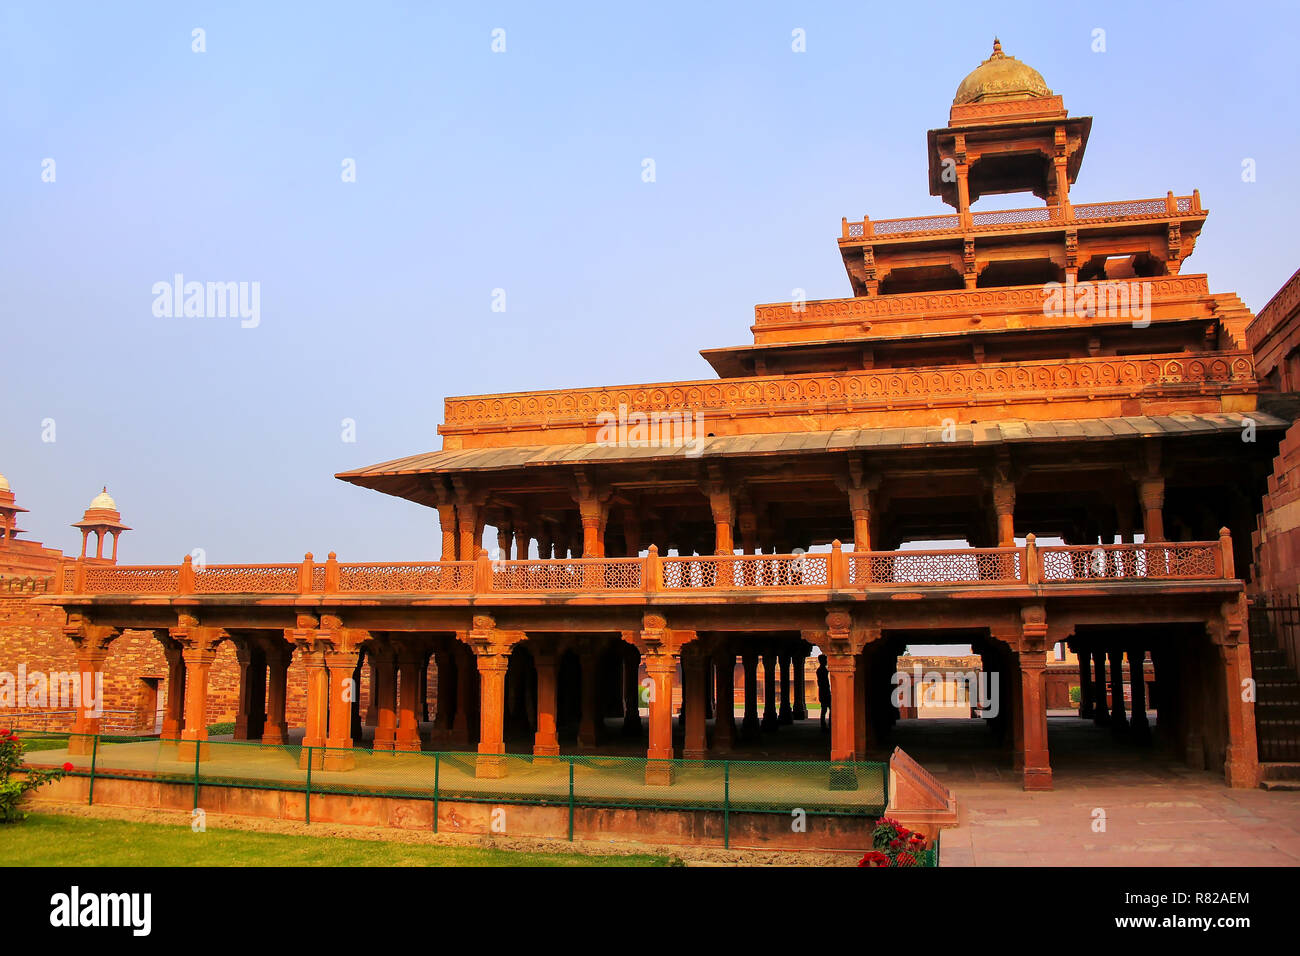 Panch Mahal in Fatehpur Sikri, Uttar Pradesh, India. Fatehpur Sikri is one of the best preserved examples of Mughal architecture in India. Stock Photo